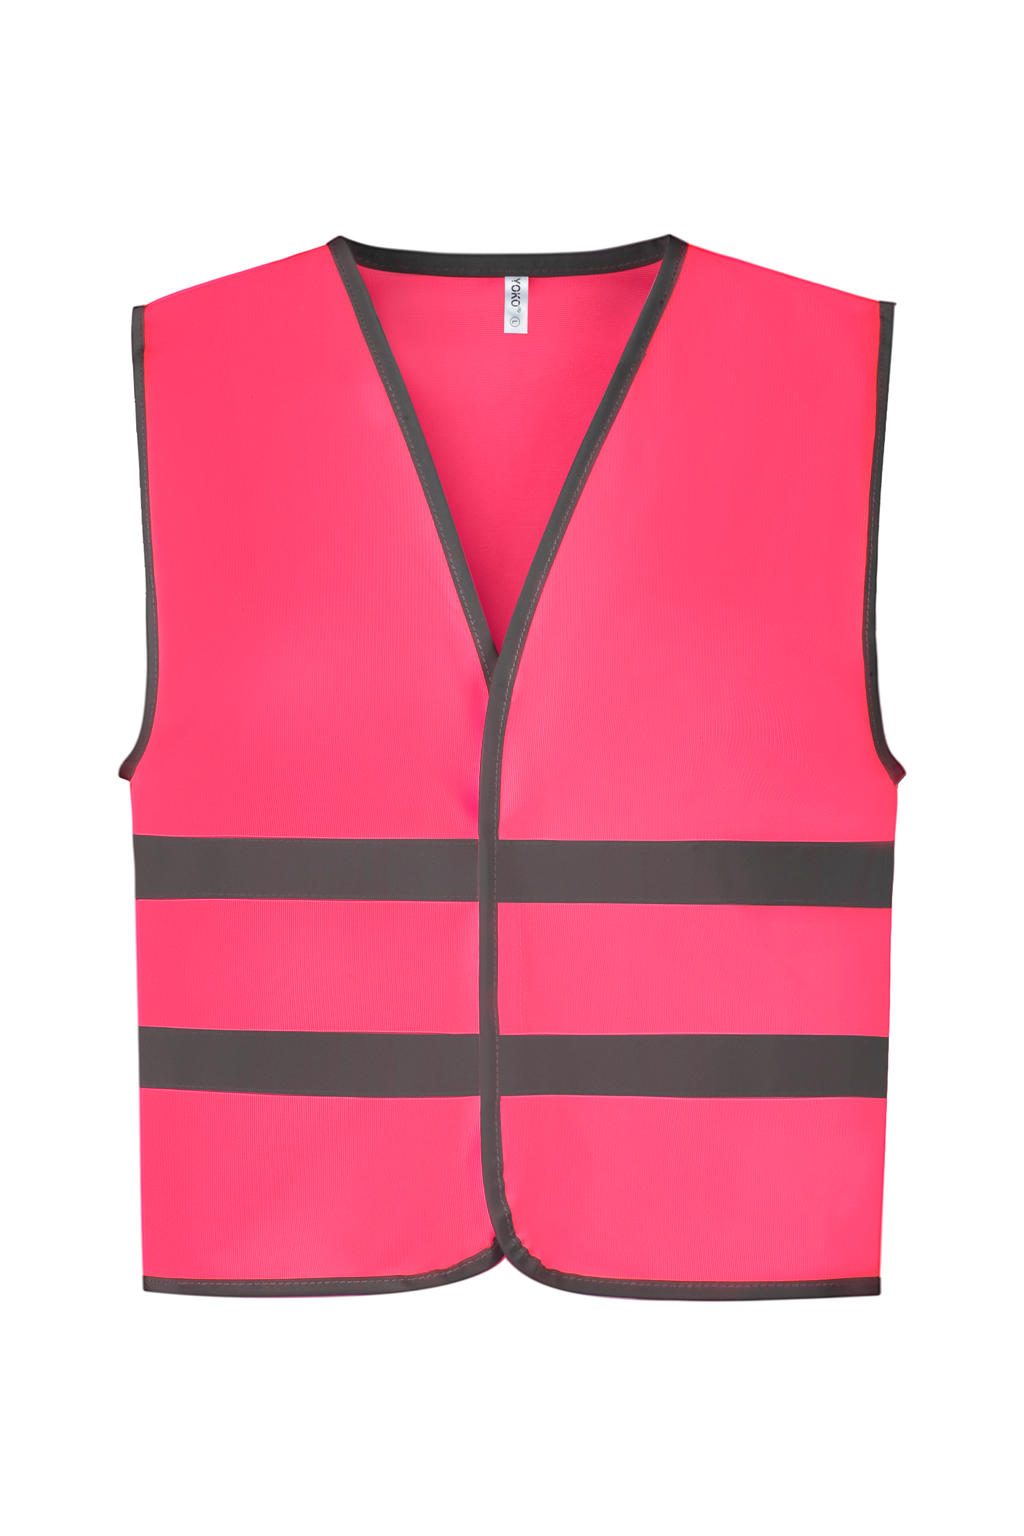  Kids Fluo Reflective Border Waistcoat in Farbe Pink